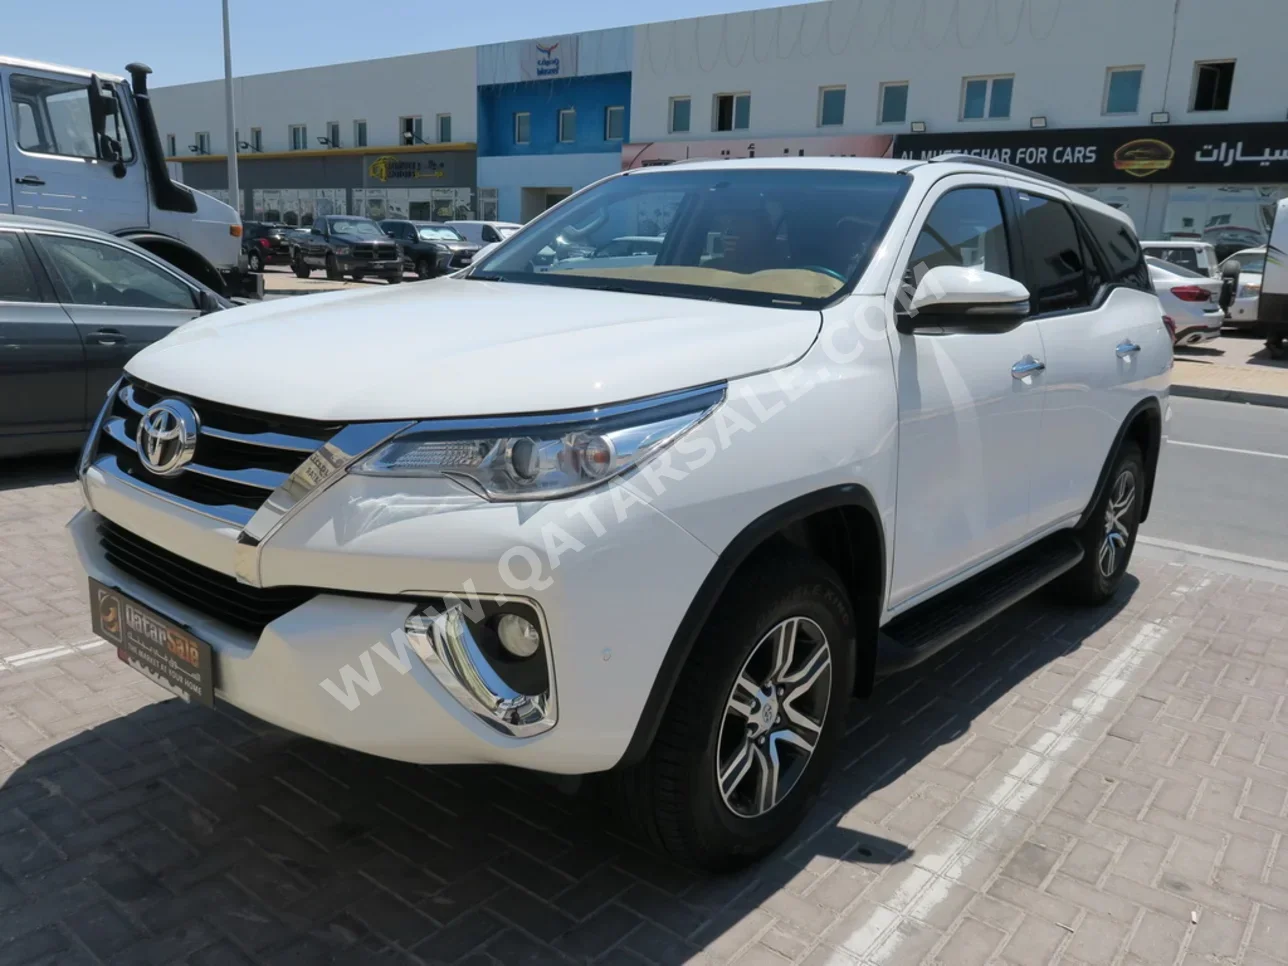 Toyota  Fortuner  2018  Automatic  113,000 Km  4 Cylinder  Four Wheel Drive (4WD)  SUV  White